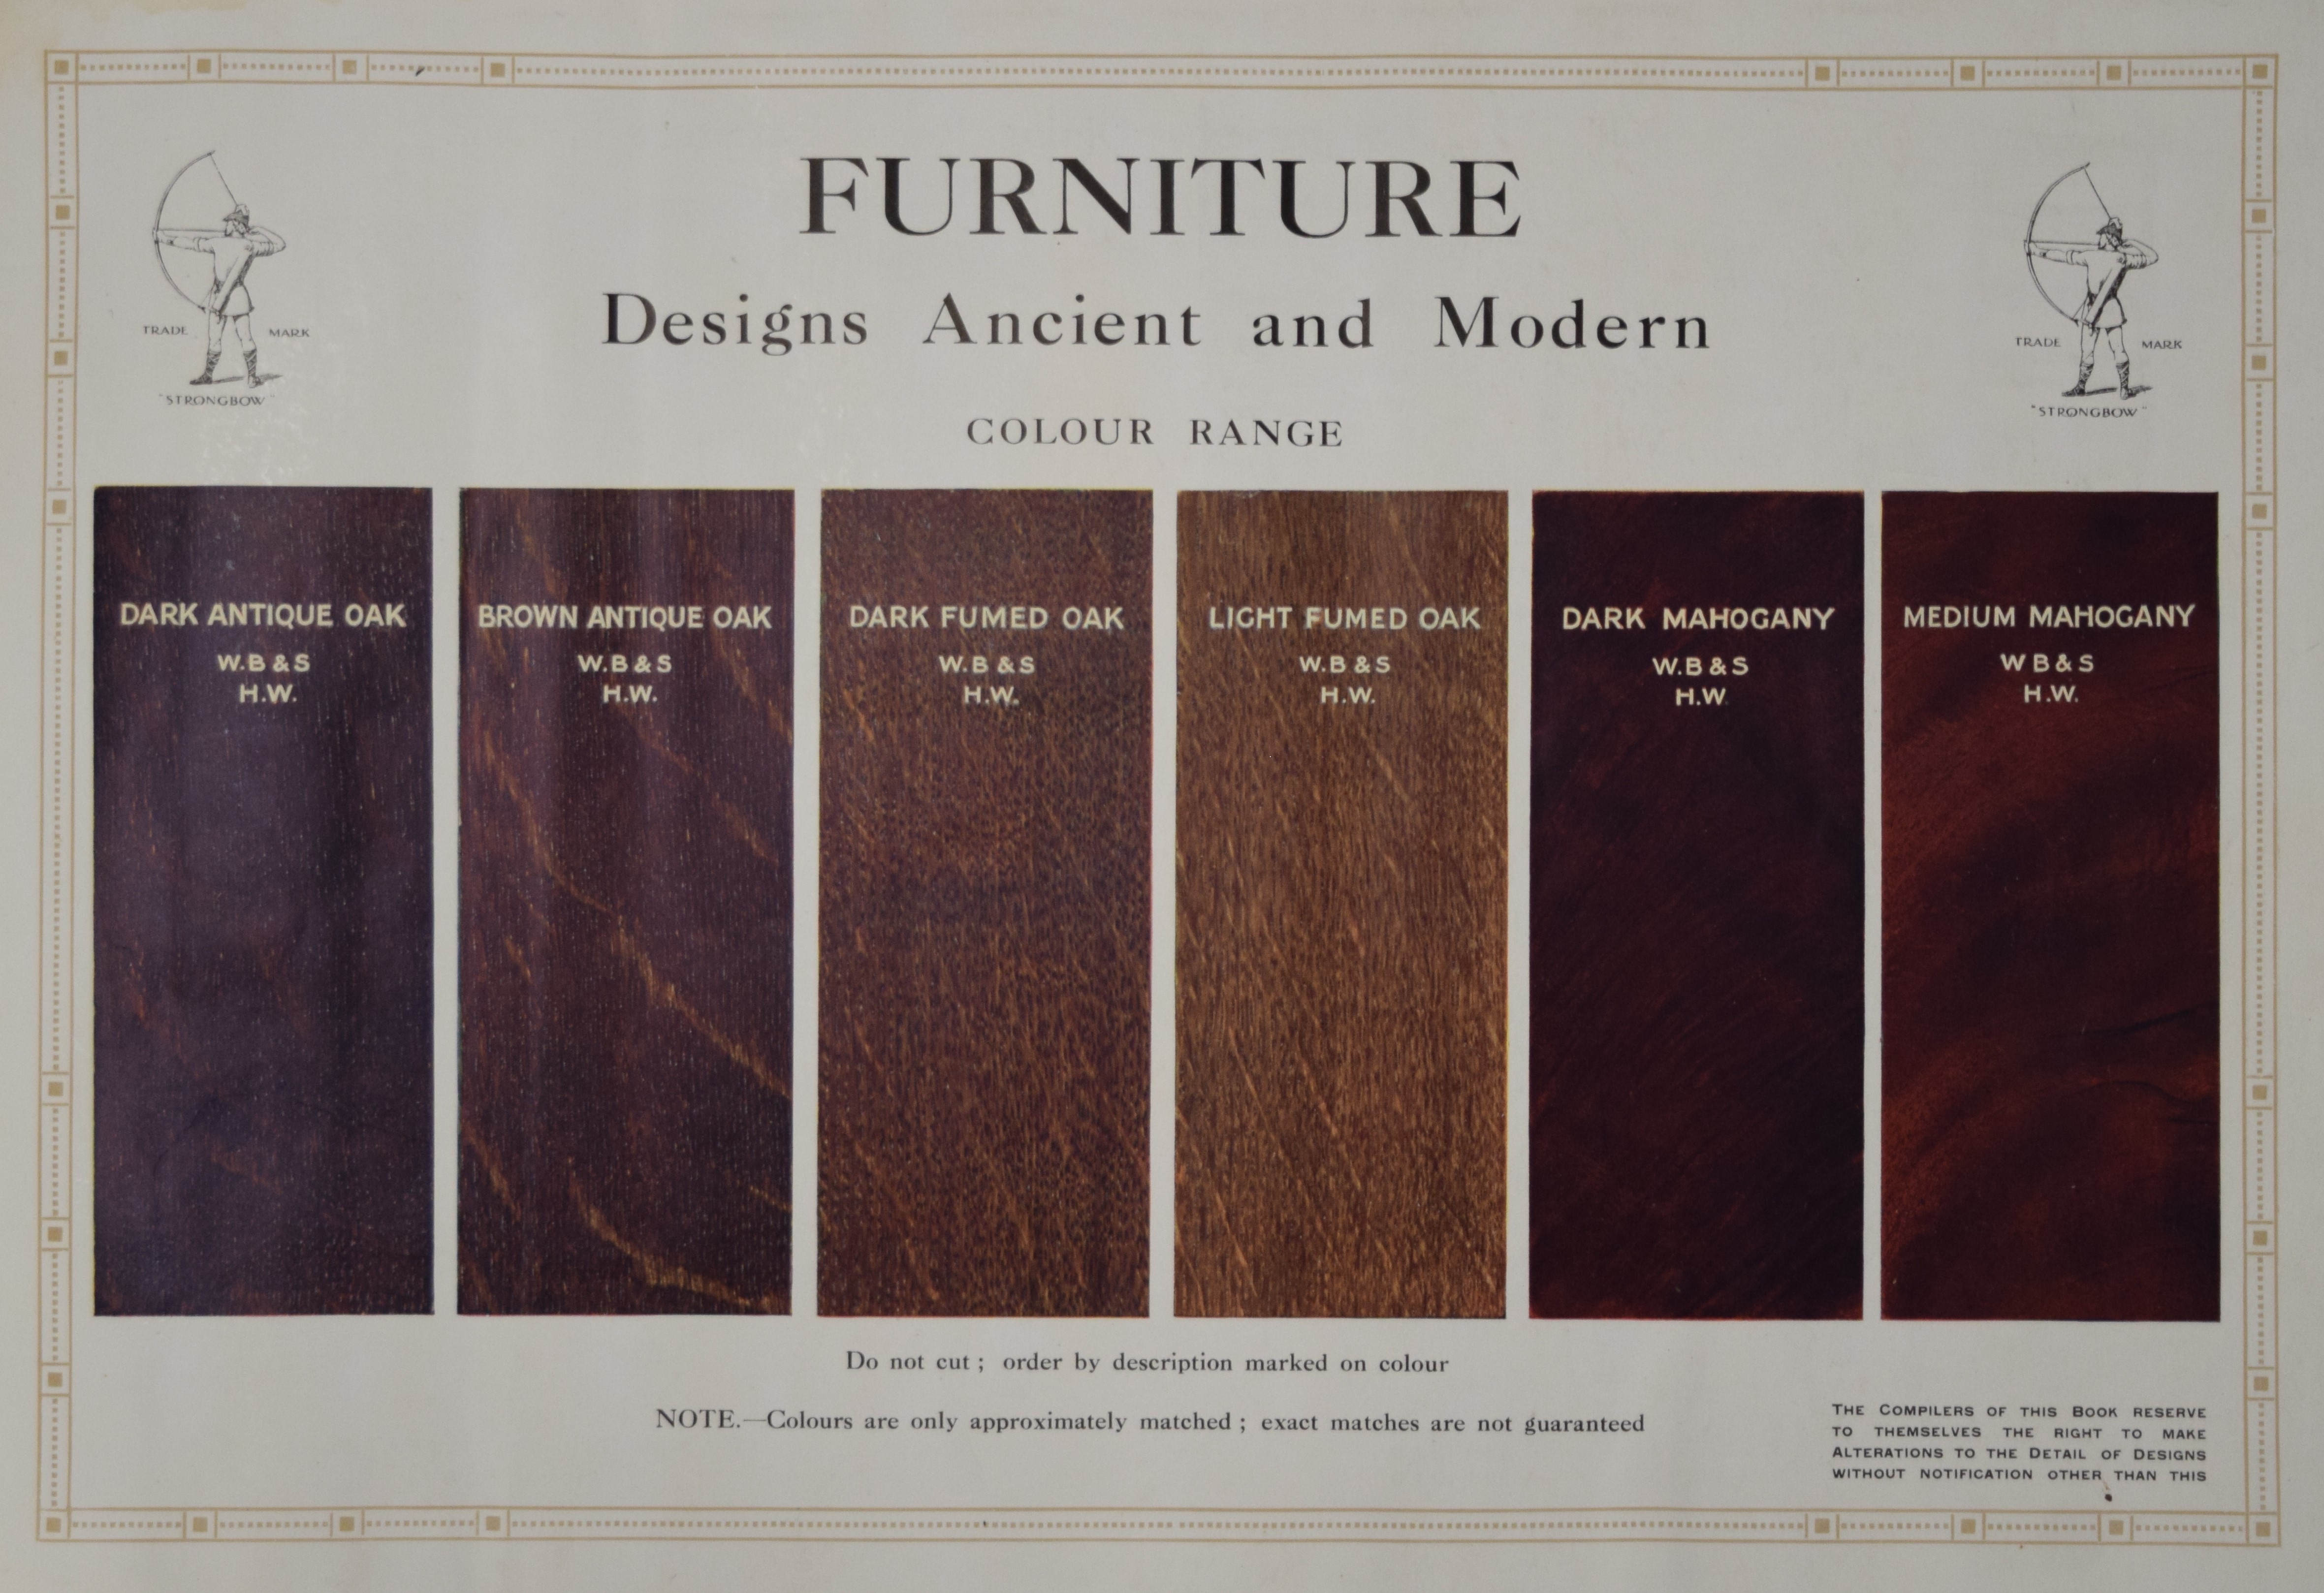 A Furniture Designs Ancient and Modern catalogue. - Image 3 of 10